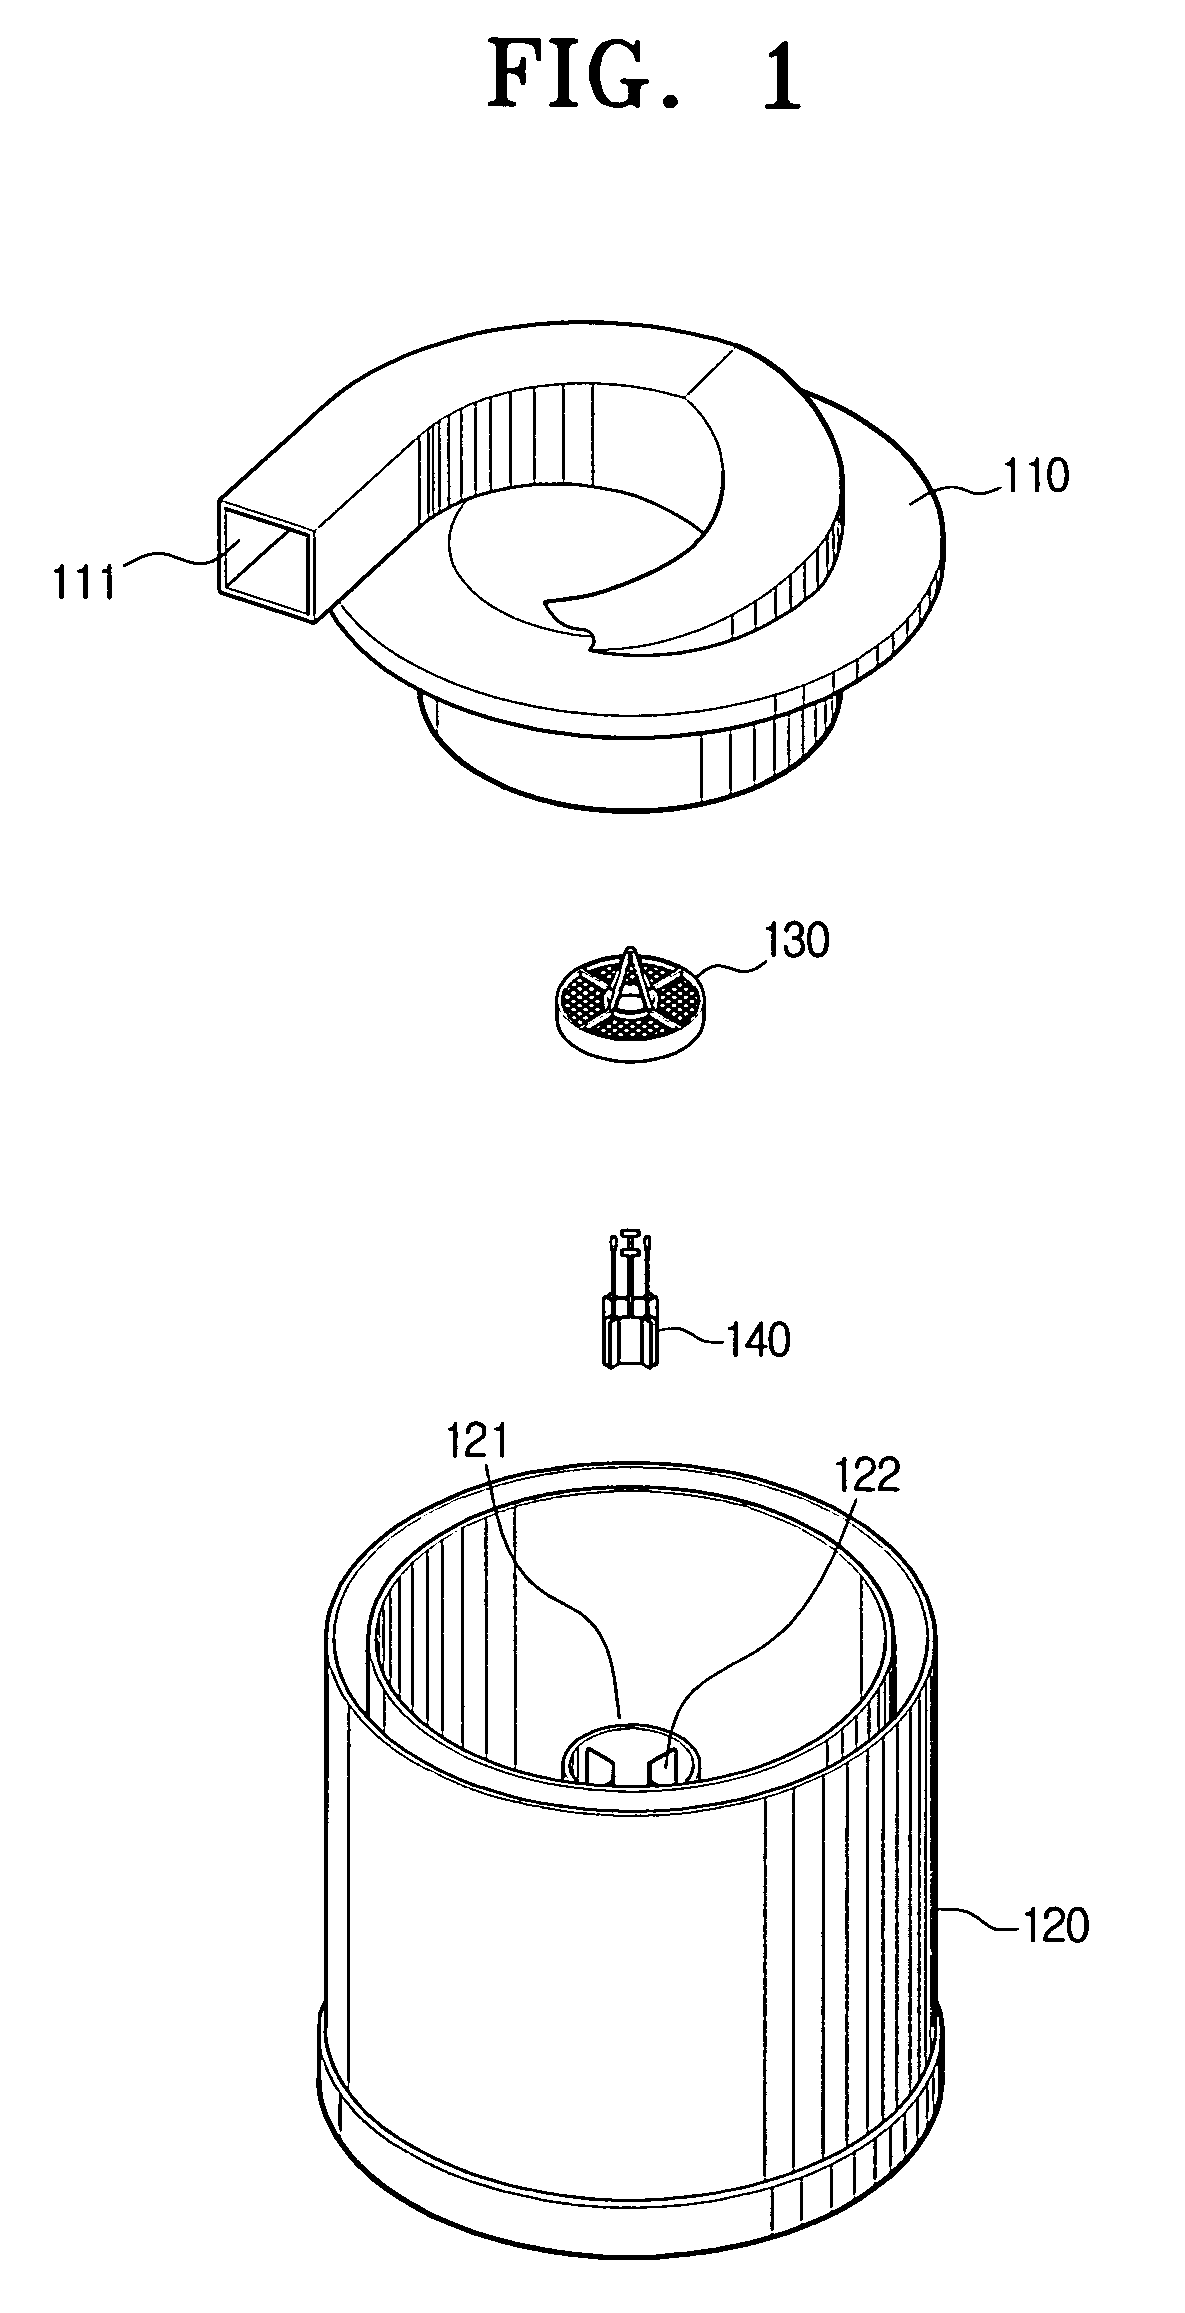 Cyclone dust collecting apparatus for vacuum cleaner